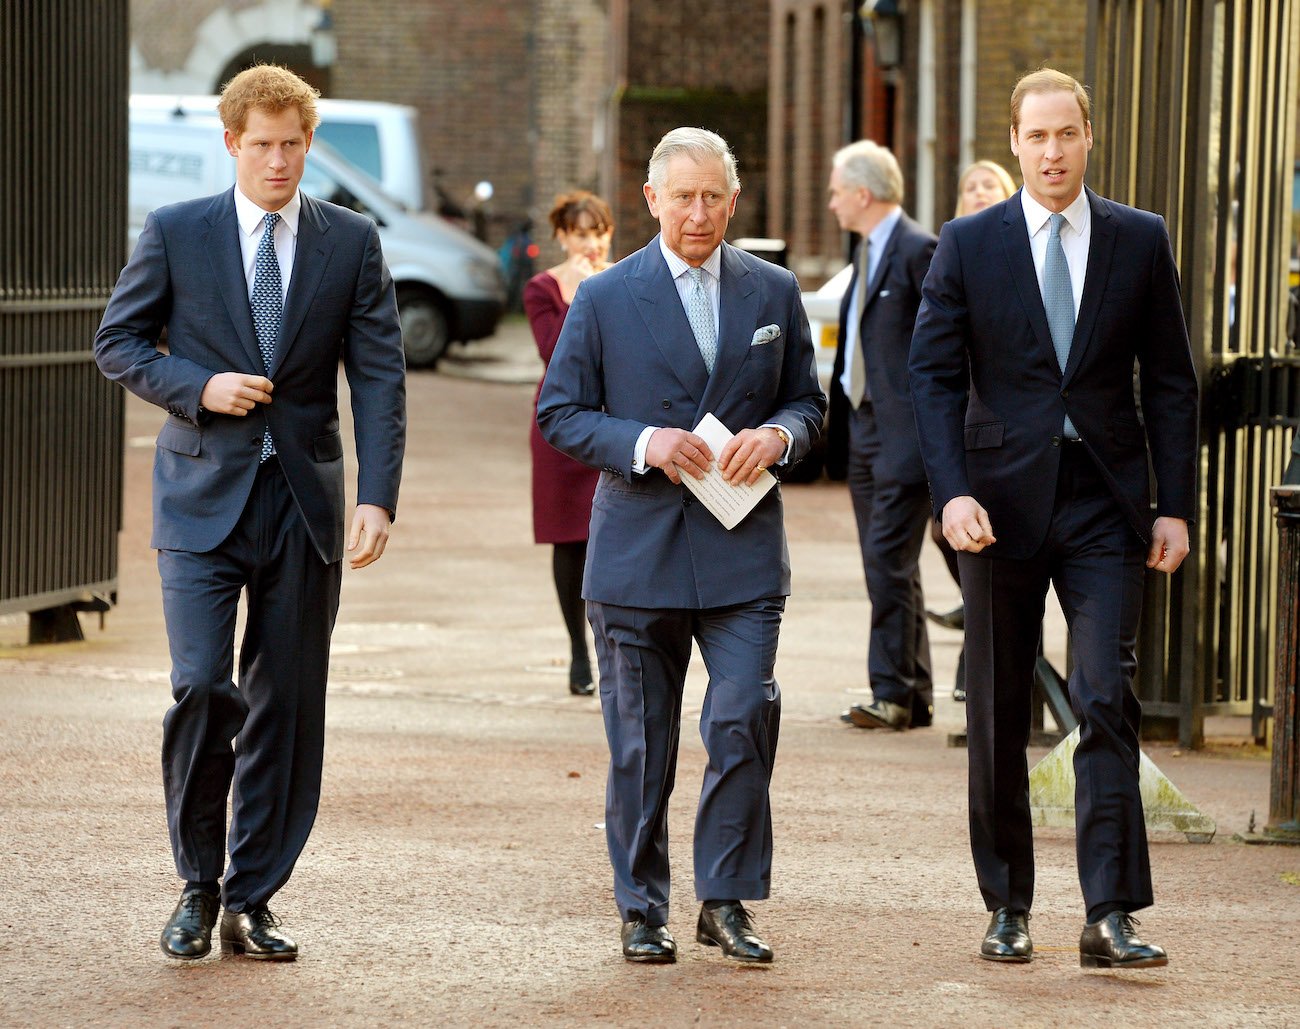 Prince Harry, Prince Charles, and Prince William wearing suits and walking together